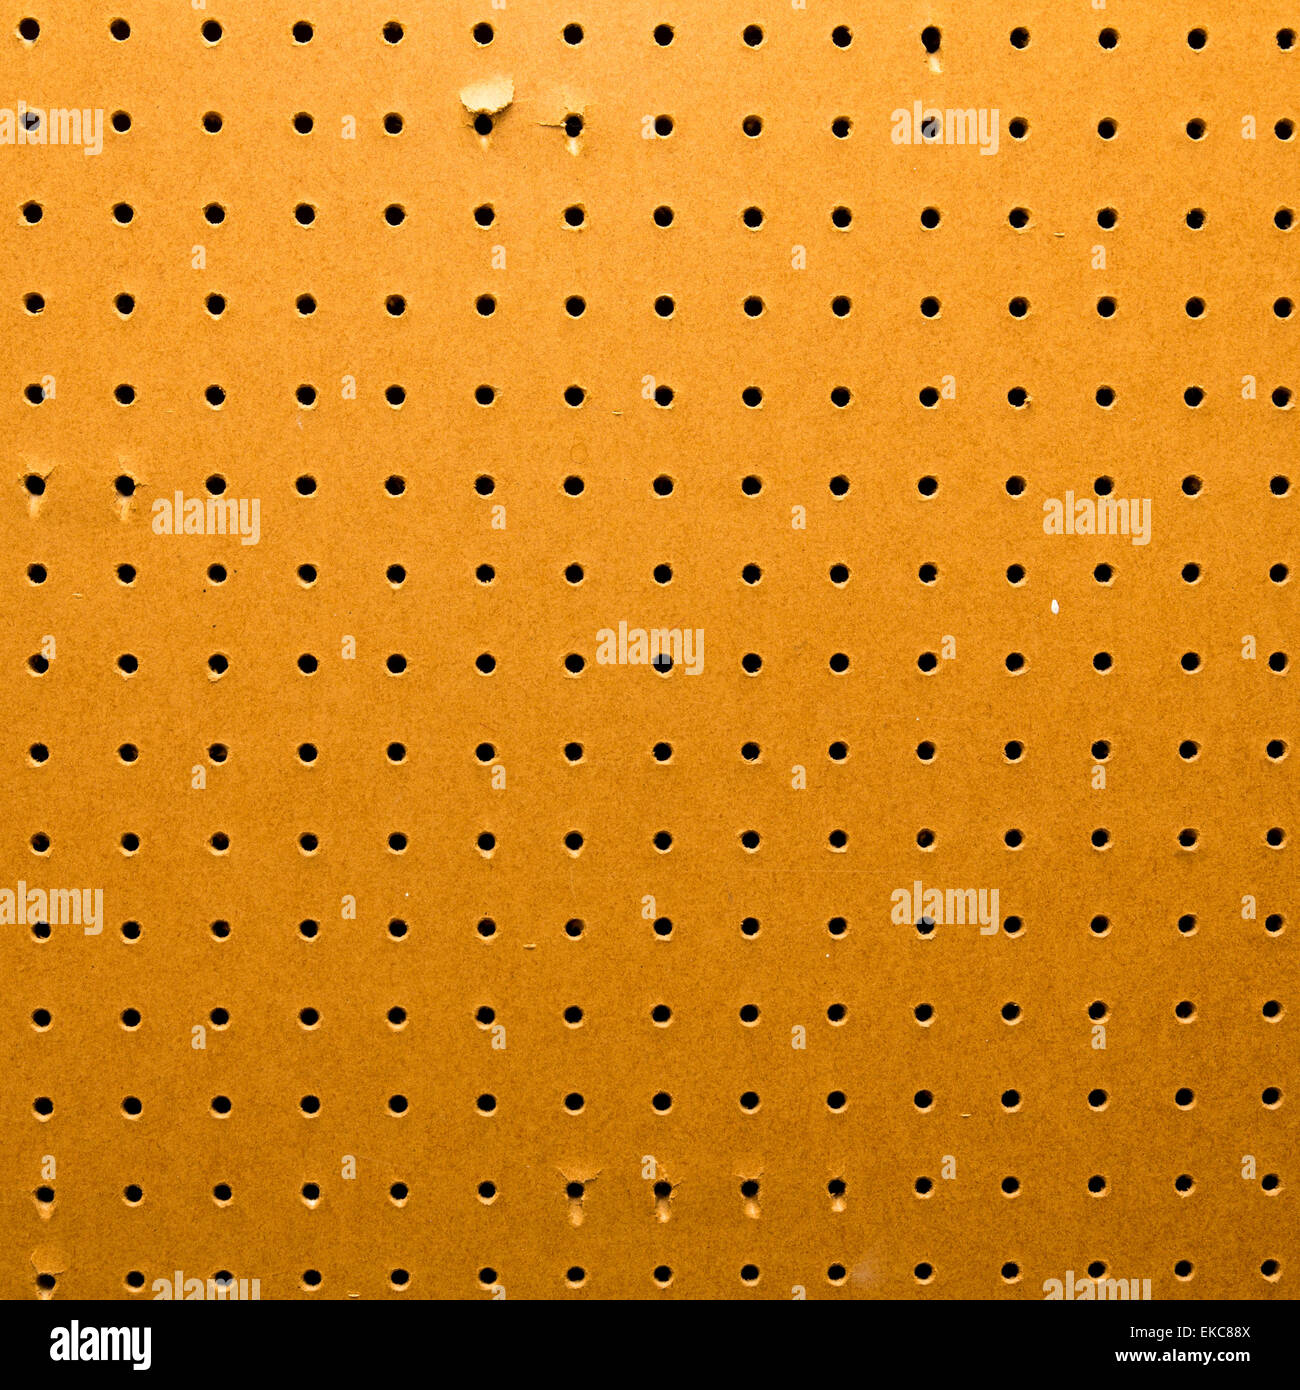 624 Peg Board Toy Images, Stock Photos, 3D objects, & Vectors